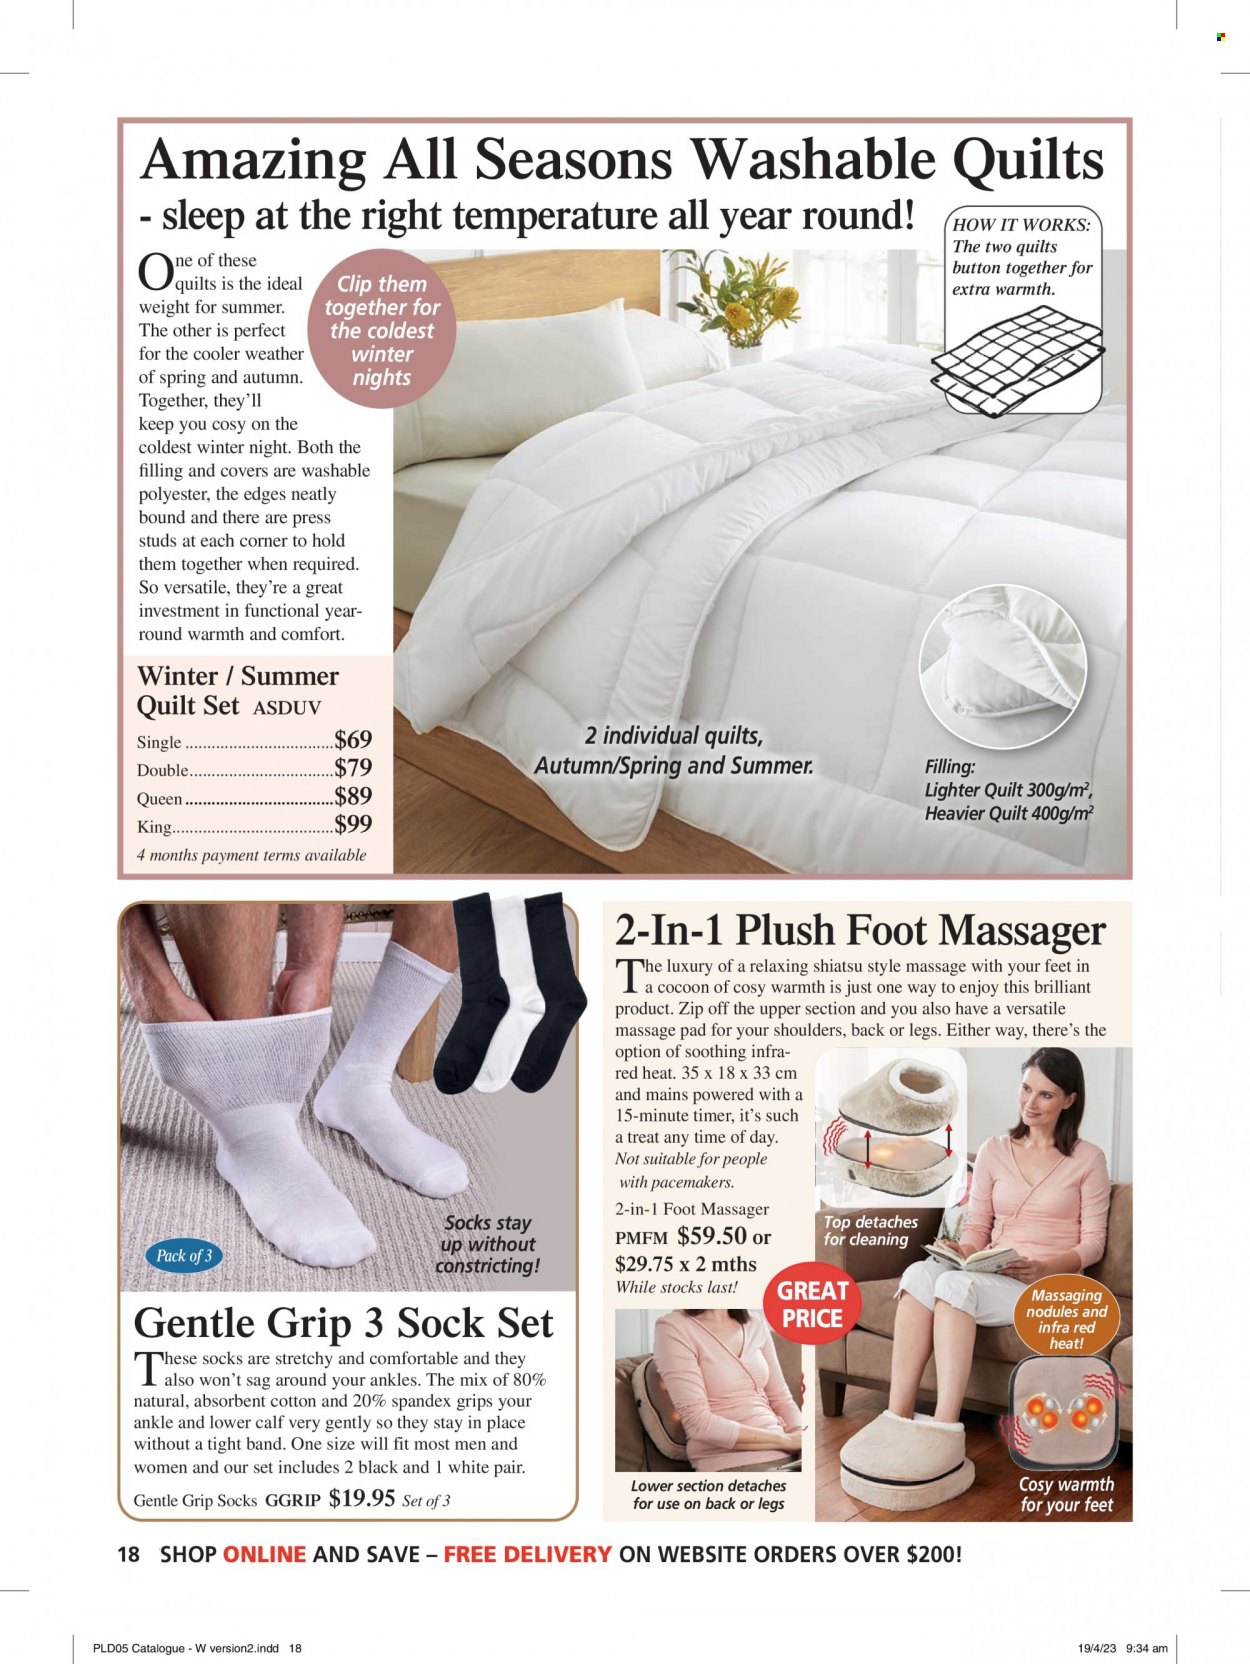 thumbnail - Innovations Catalogue - Sales products - quilt, massager, foot massager, socks, gentle grip socks. Page 18.